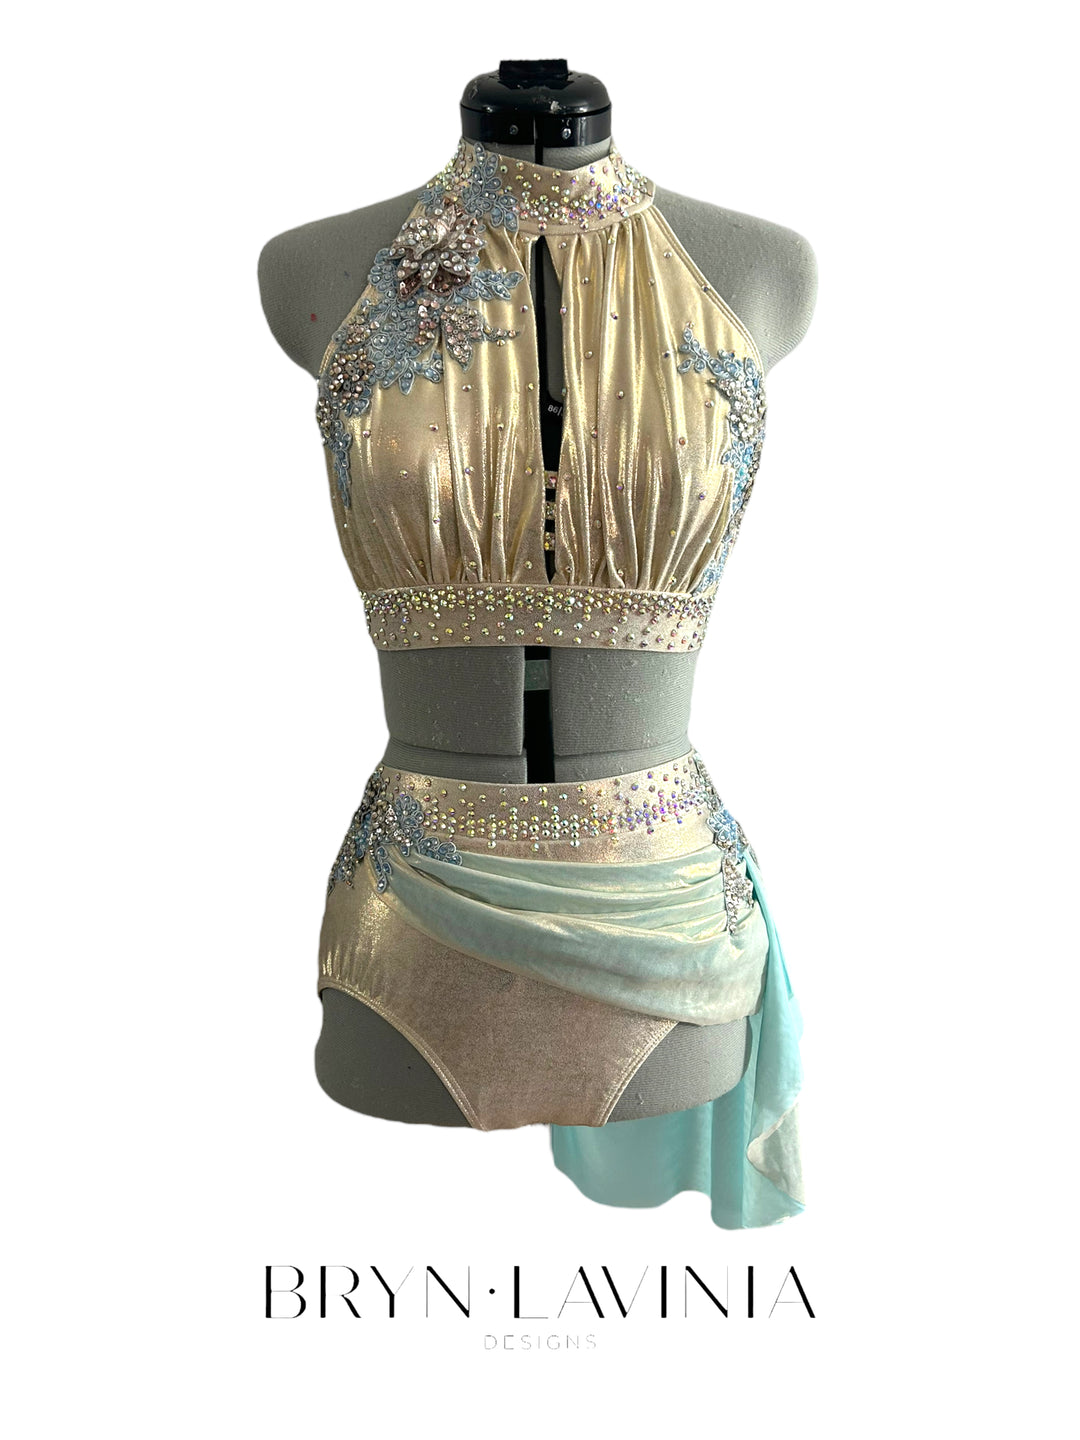 NEW AS Metallic Champagne/Light Blue ready to ship costume